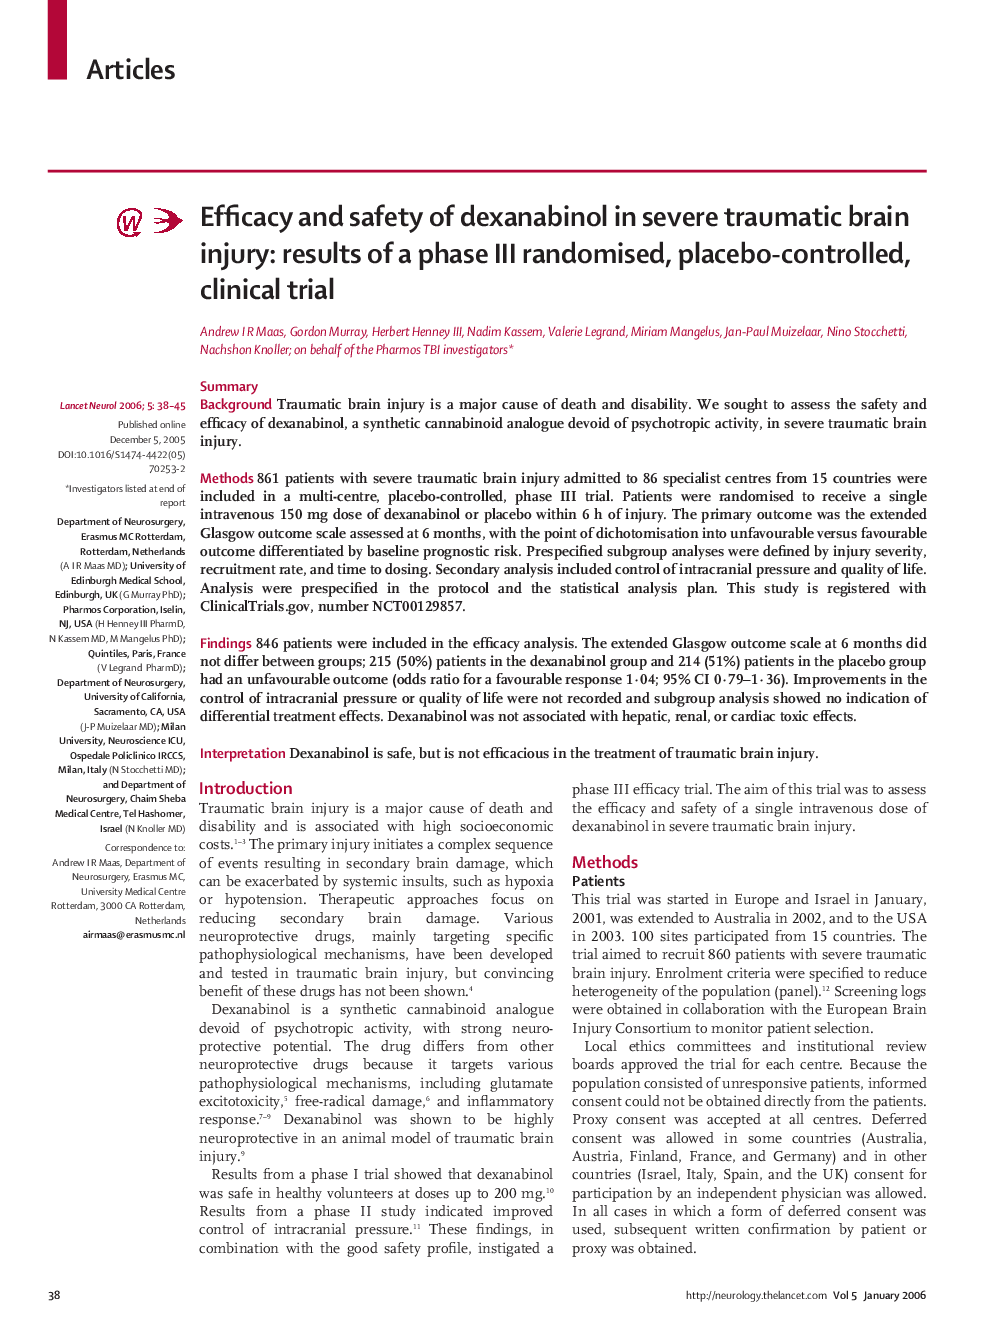 Efficacy and safety of dexanabinol in severe traumatic brain injury: results of a phase III randomised, placebo-controlled, clinical trial